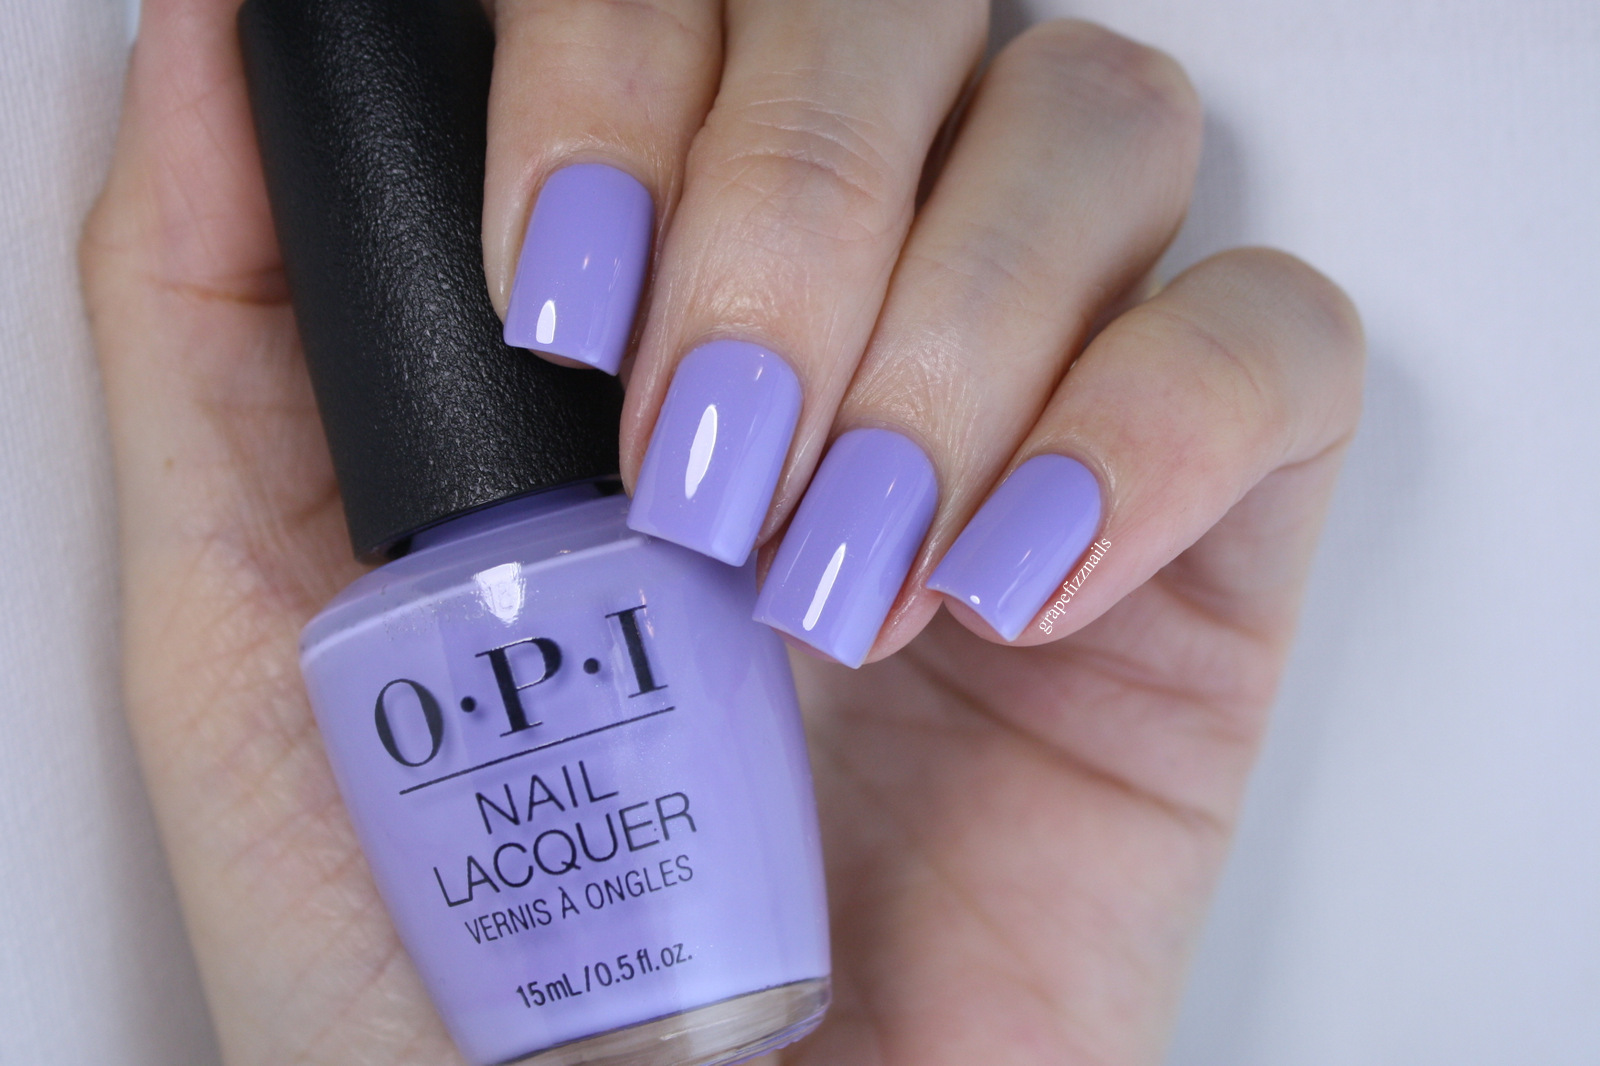 8. OPI Infinite Shine Nail Polish in "You're Such a Budapest" - wide 2